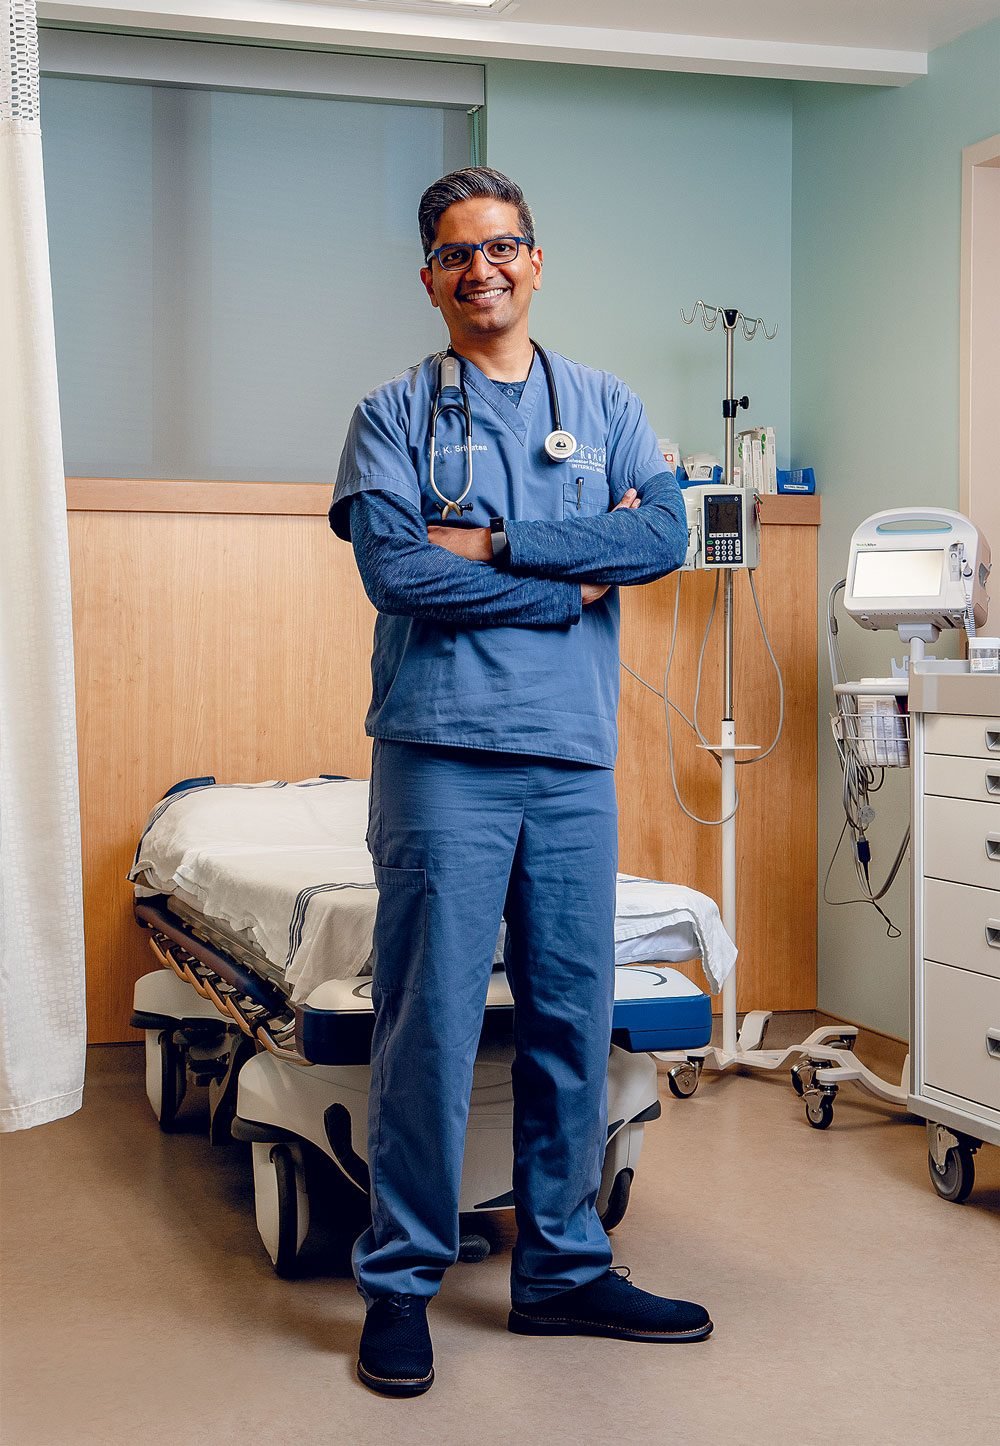 Dr. Kris Srivatsa standing in a hospital room.